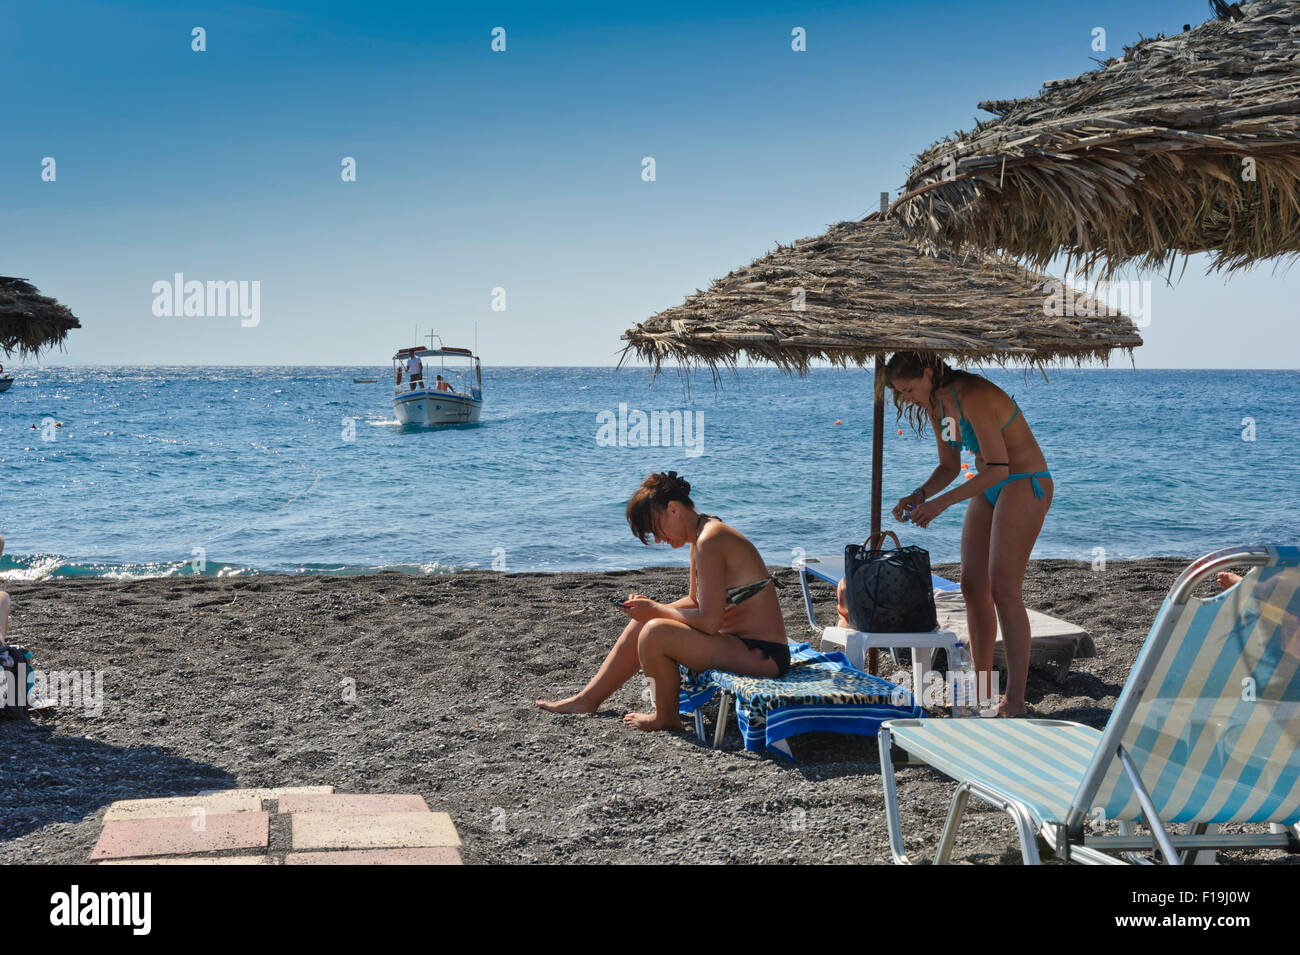 Two female sunbathers under a straw umbrella while a small boat approaching the beach in Kamari, Santorini, Greece. Stock Photo